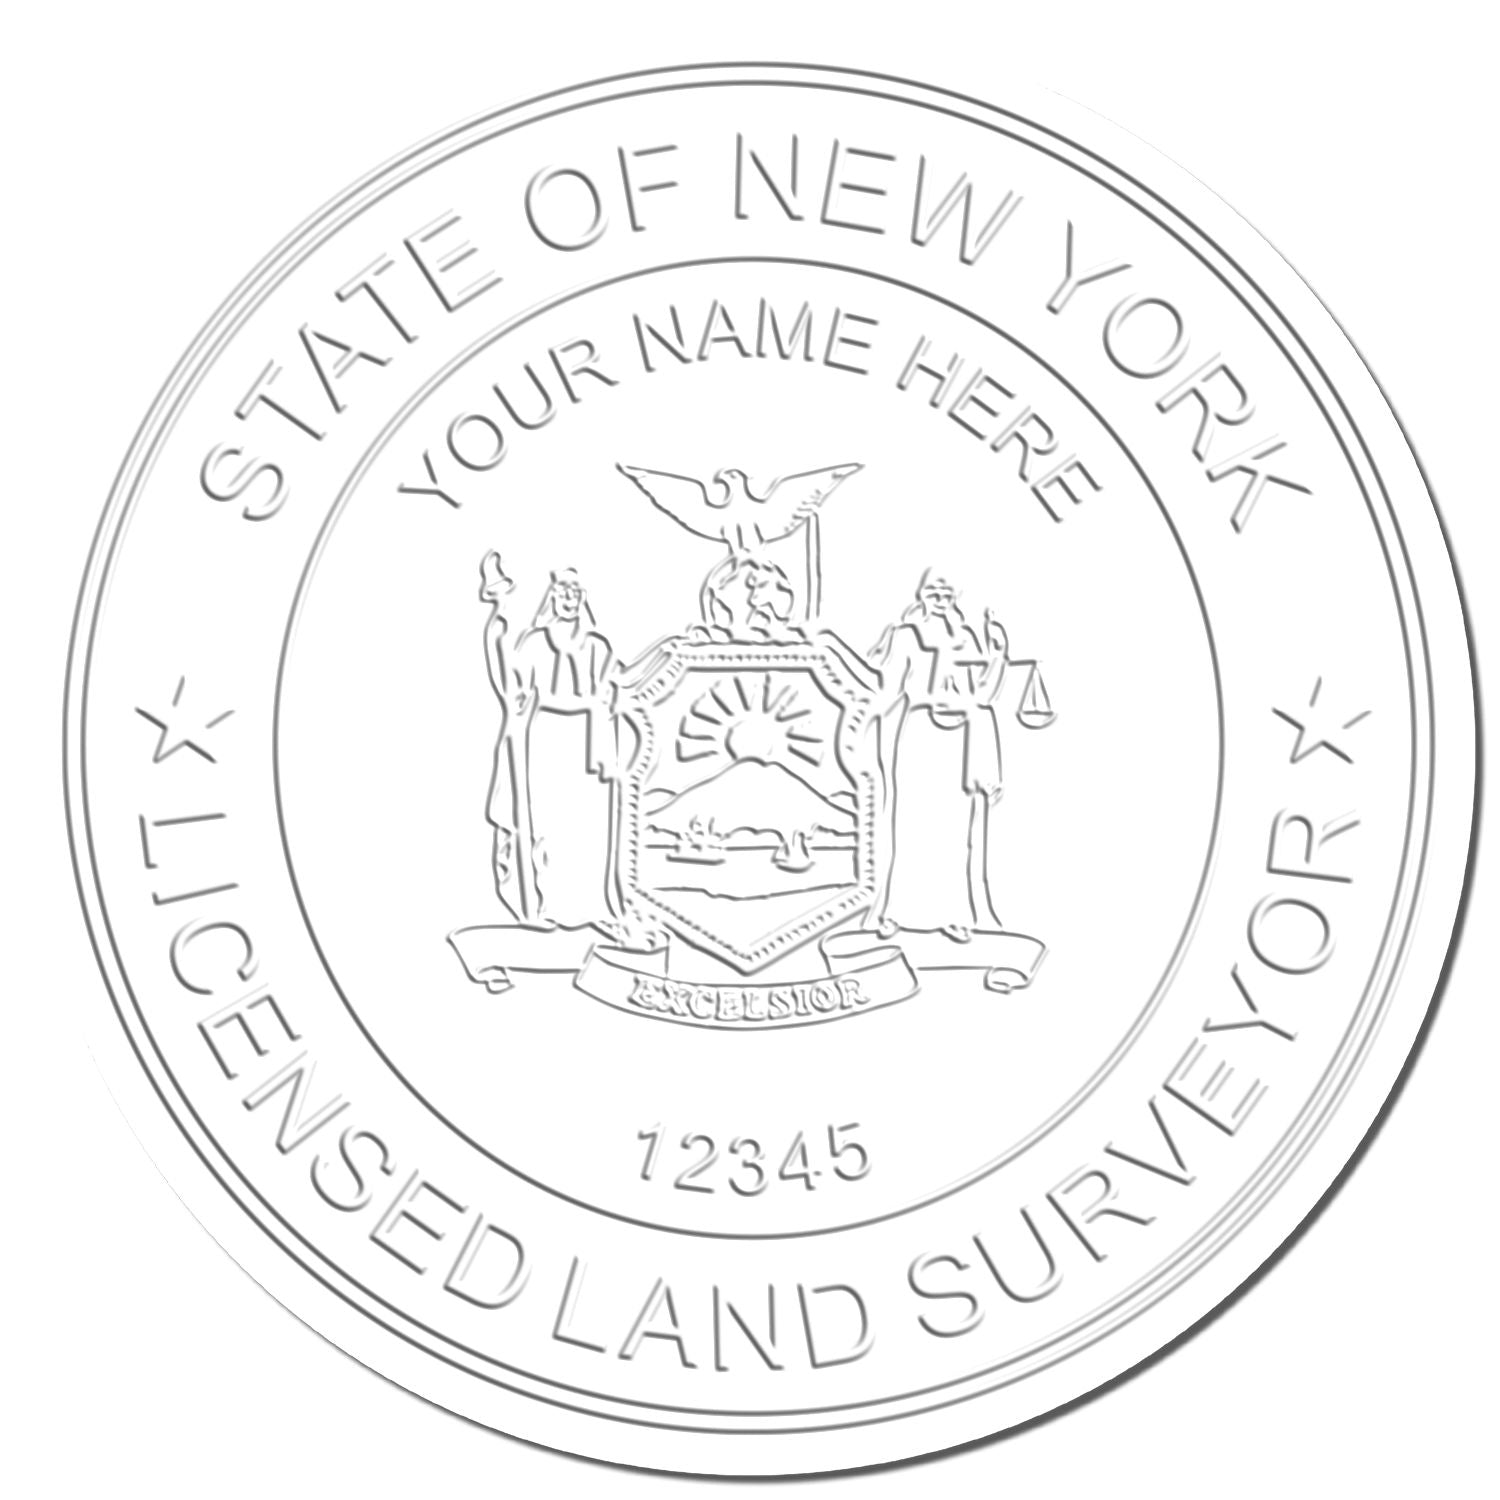 This paper is stamped with a sample imprint of the Heavy Duty Cast Iron New York Land Surveyor Seal Embosser, signifying its quality and reliability.